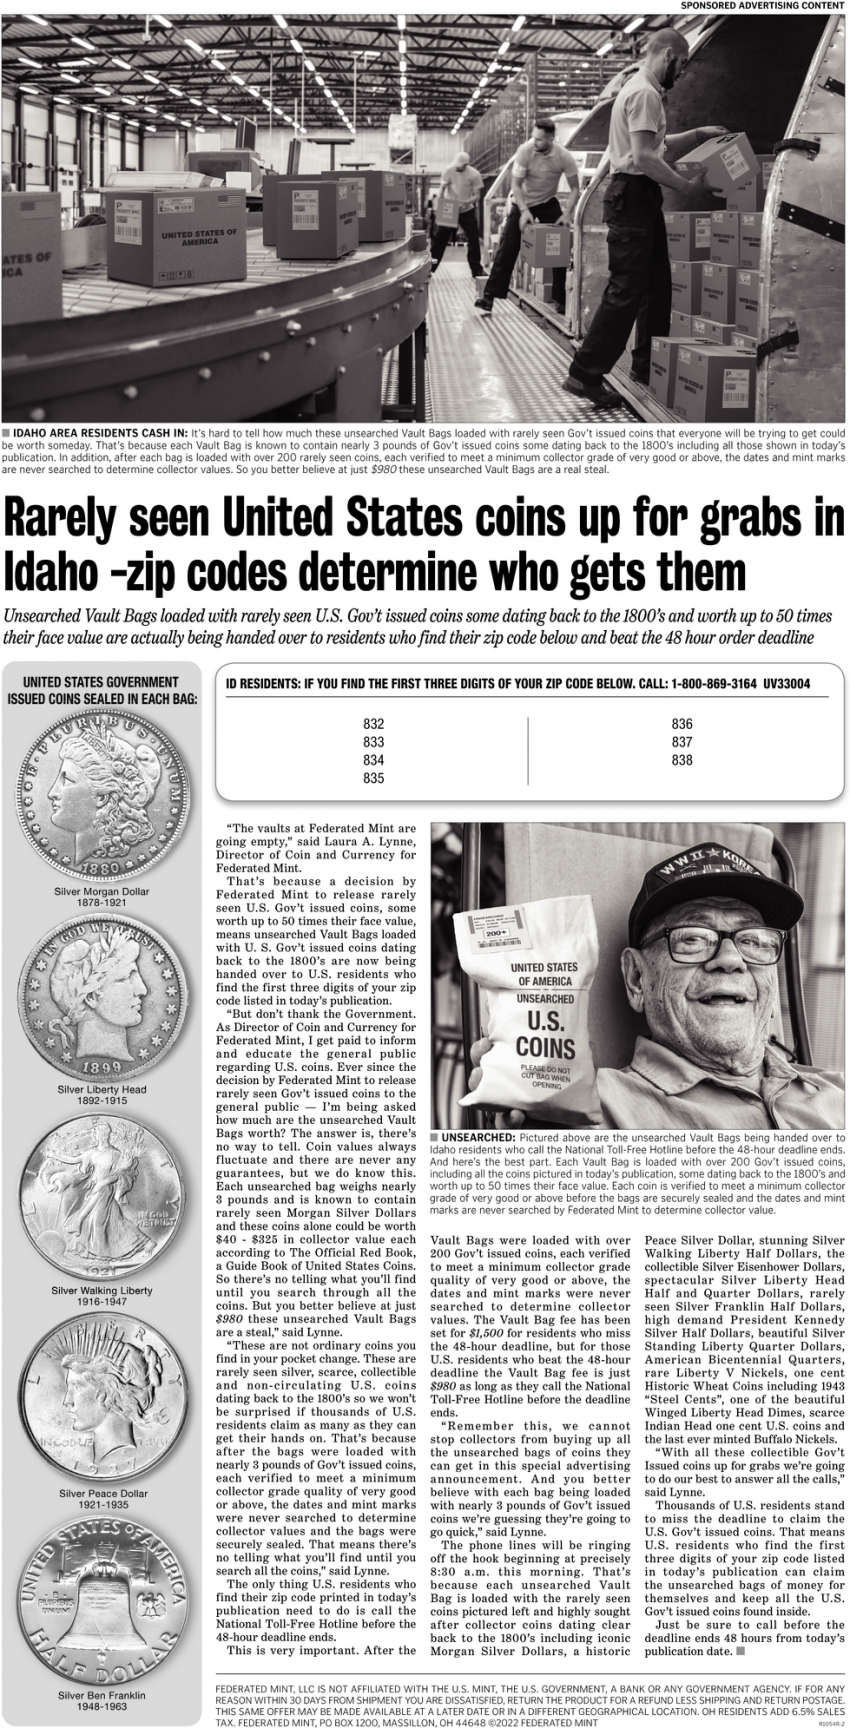 Rarely Seen United States Coins Up For Grabs